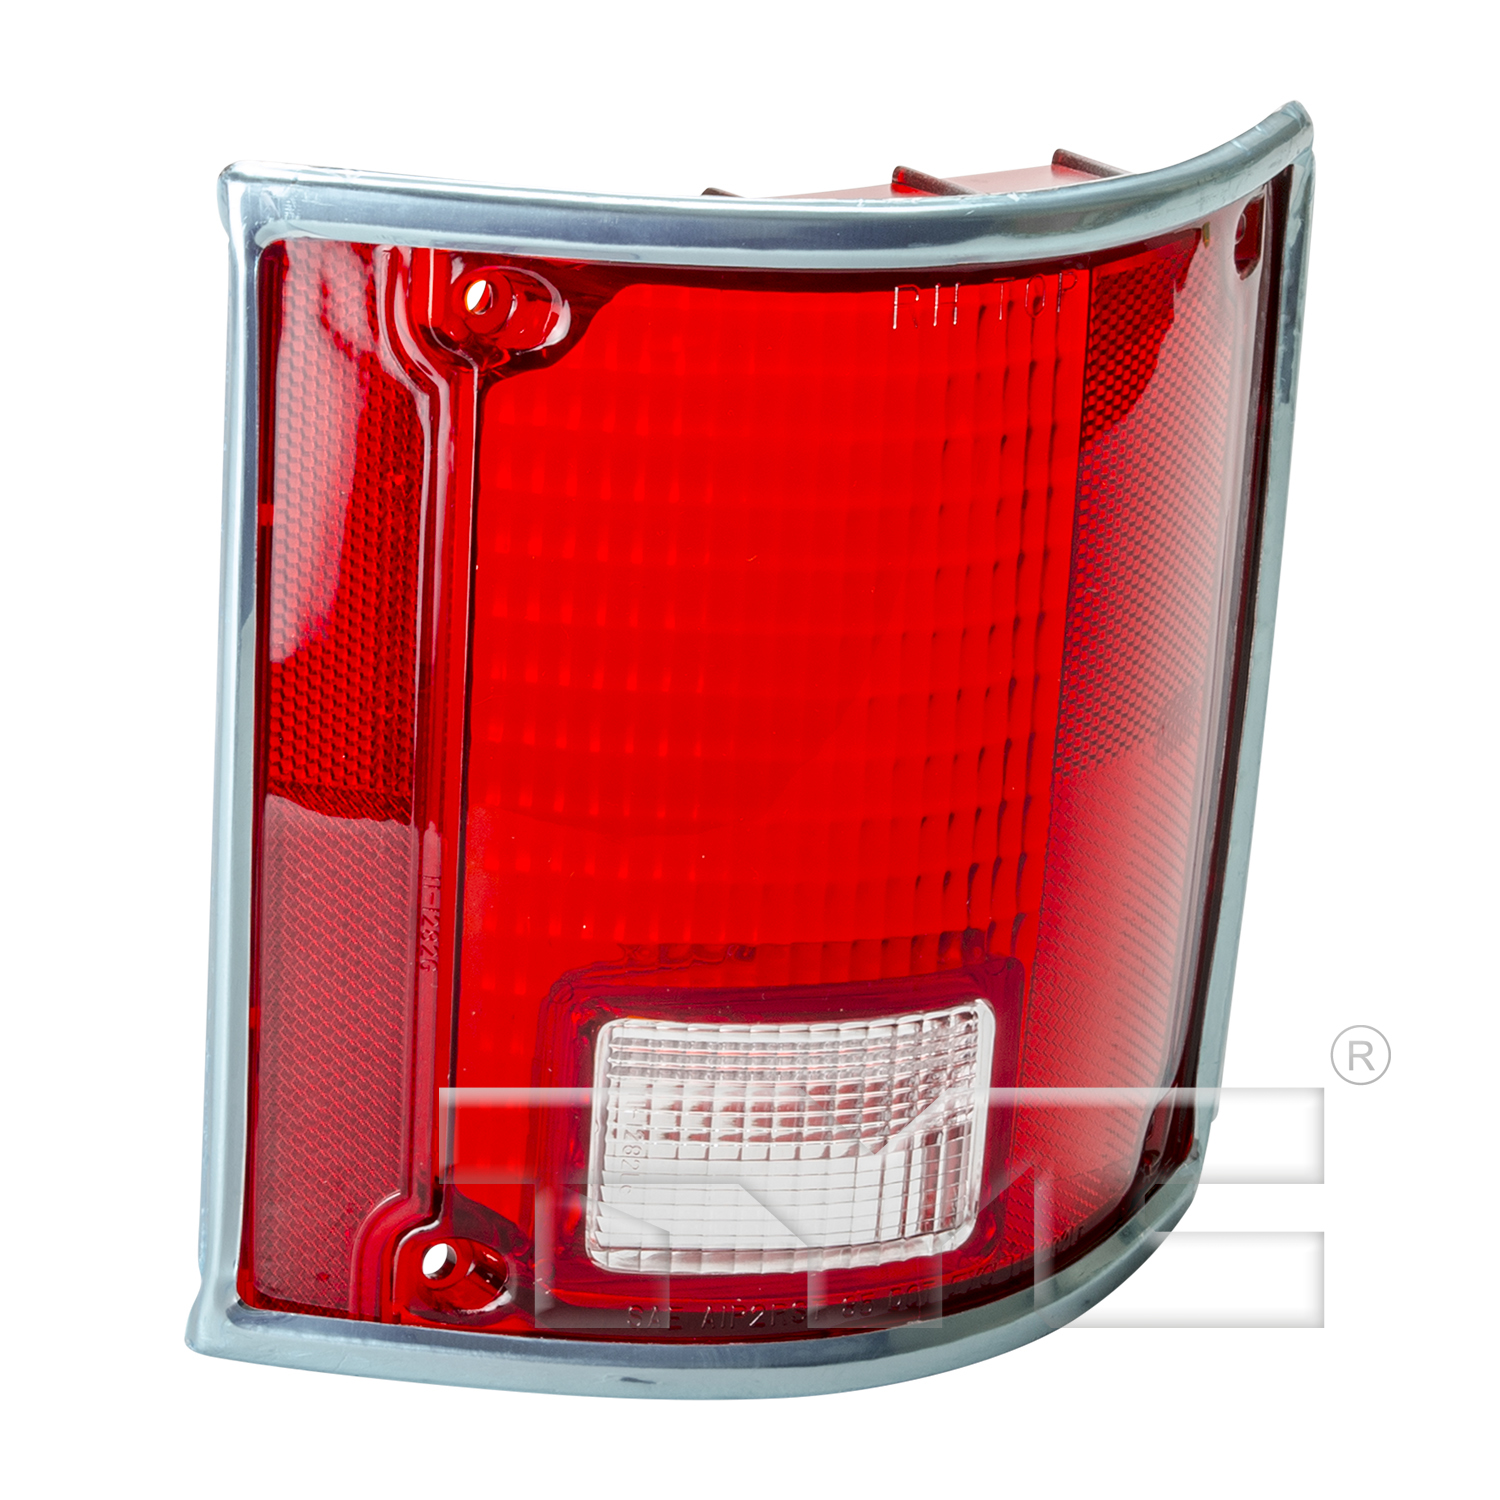 Aftermarket TAILLIGHTS for GMC - K2500, K2500,79-87,RT Taillamp lens